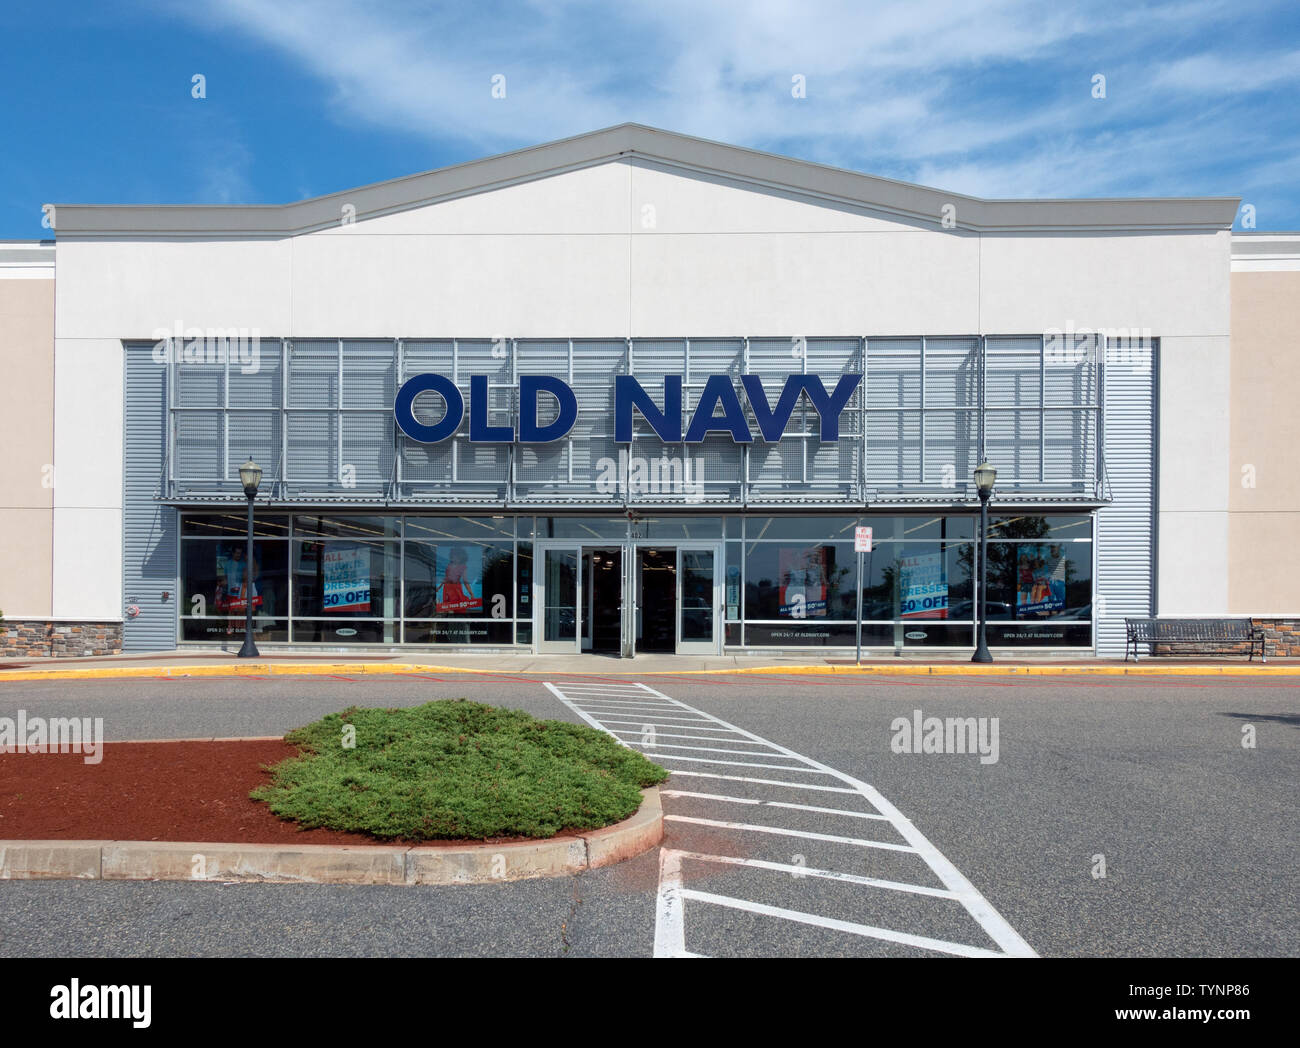 Old Navy clothing store storefront Stock Photo